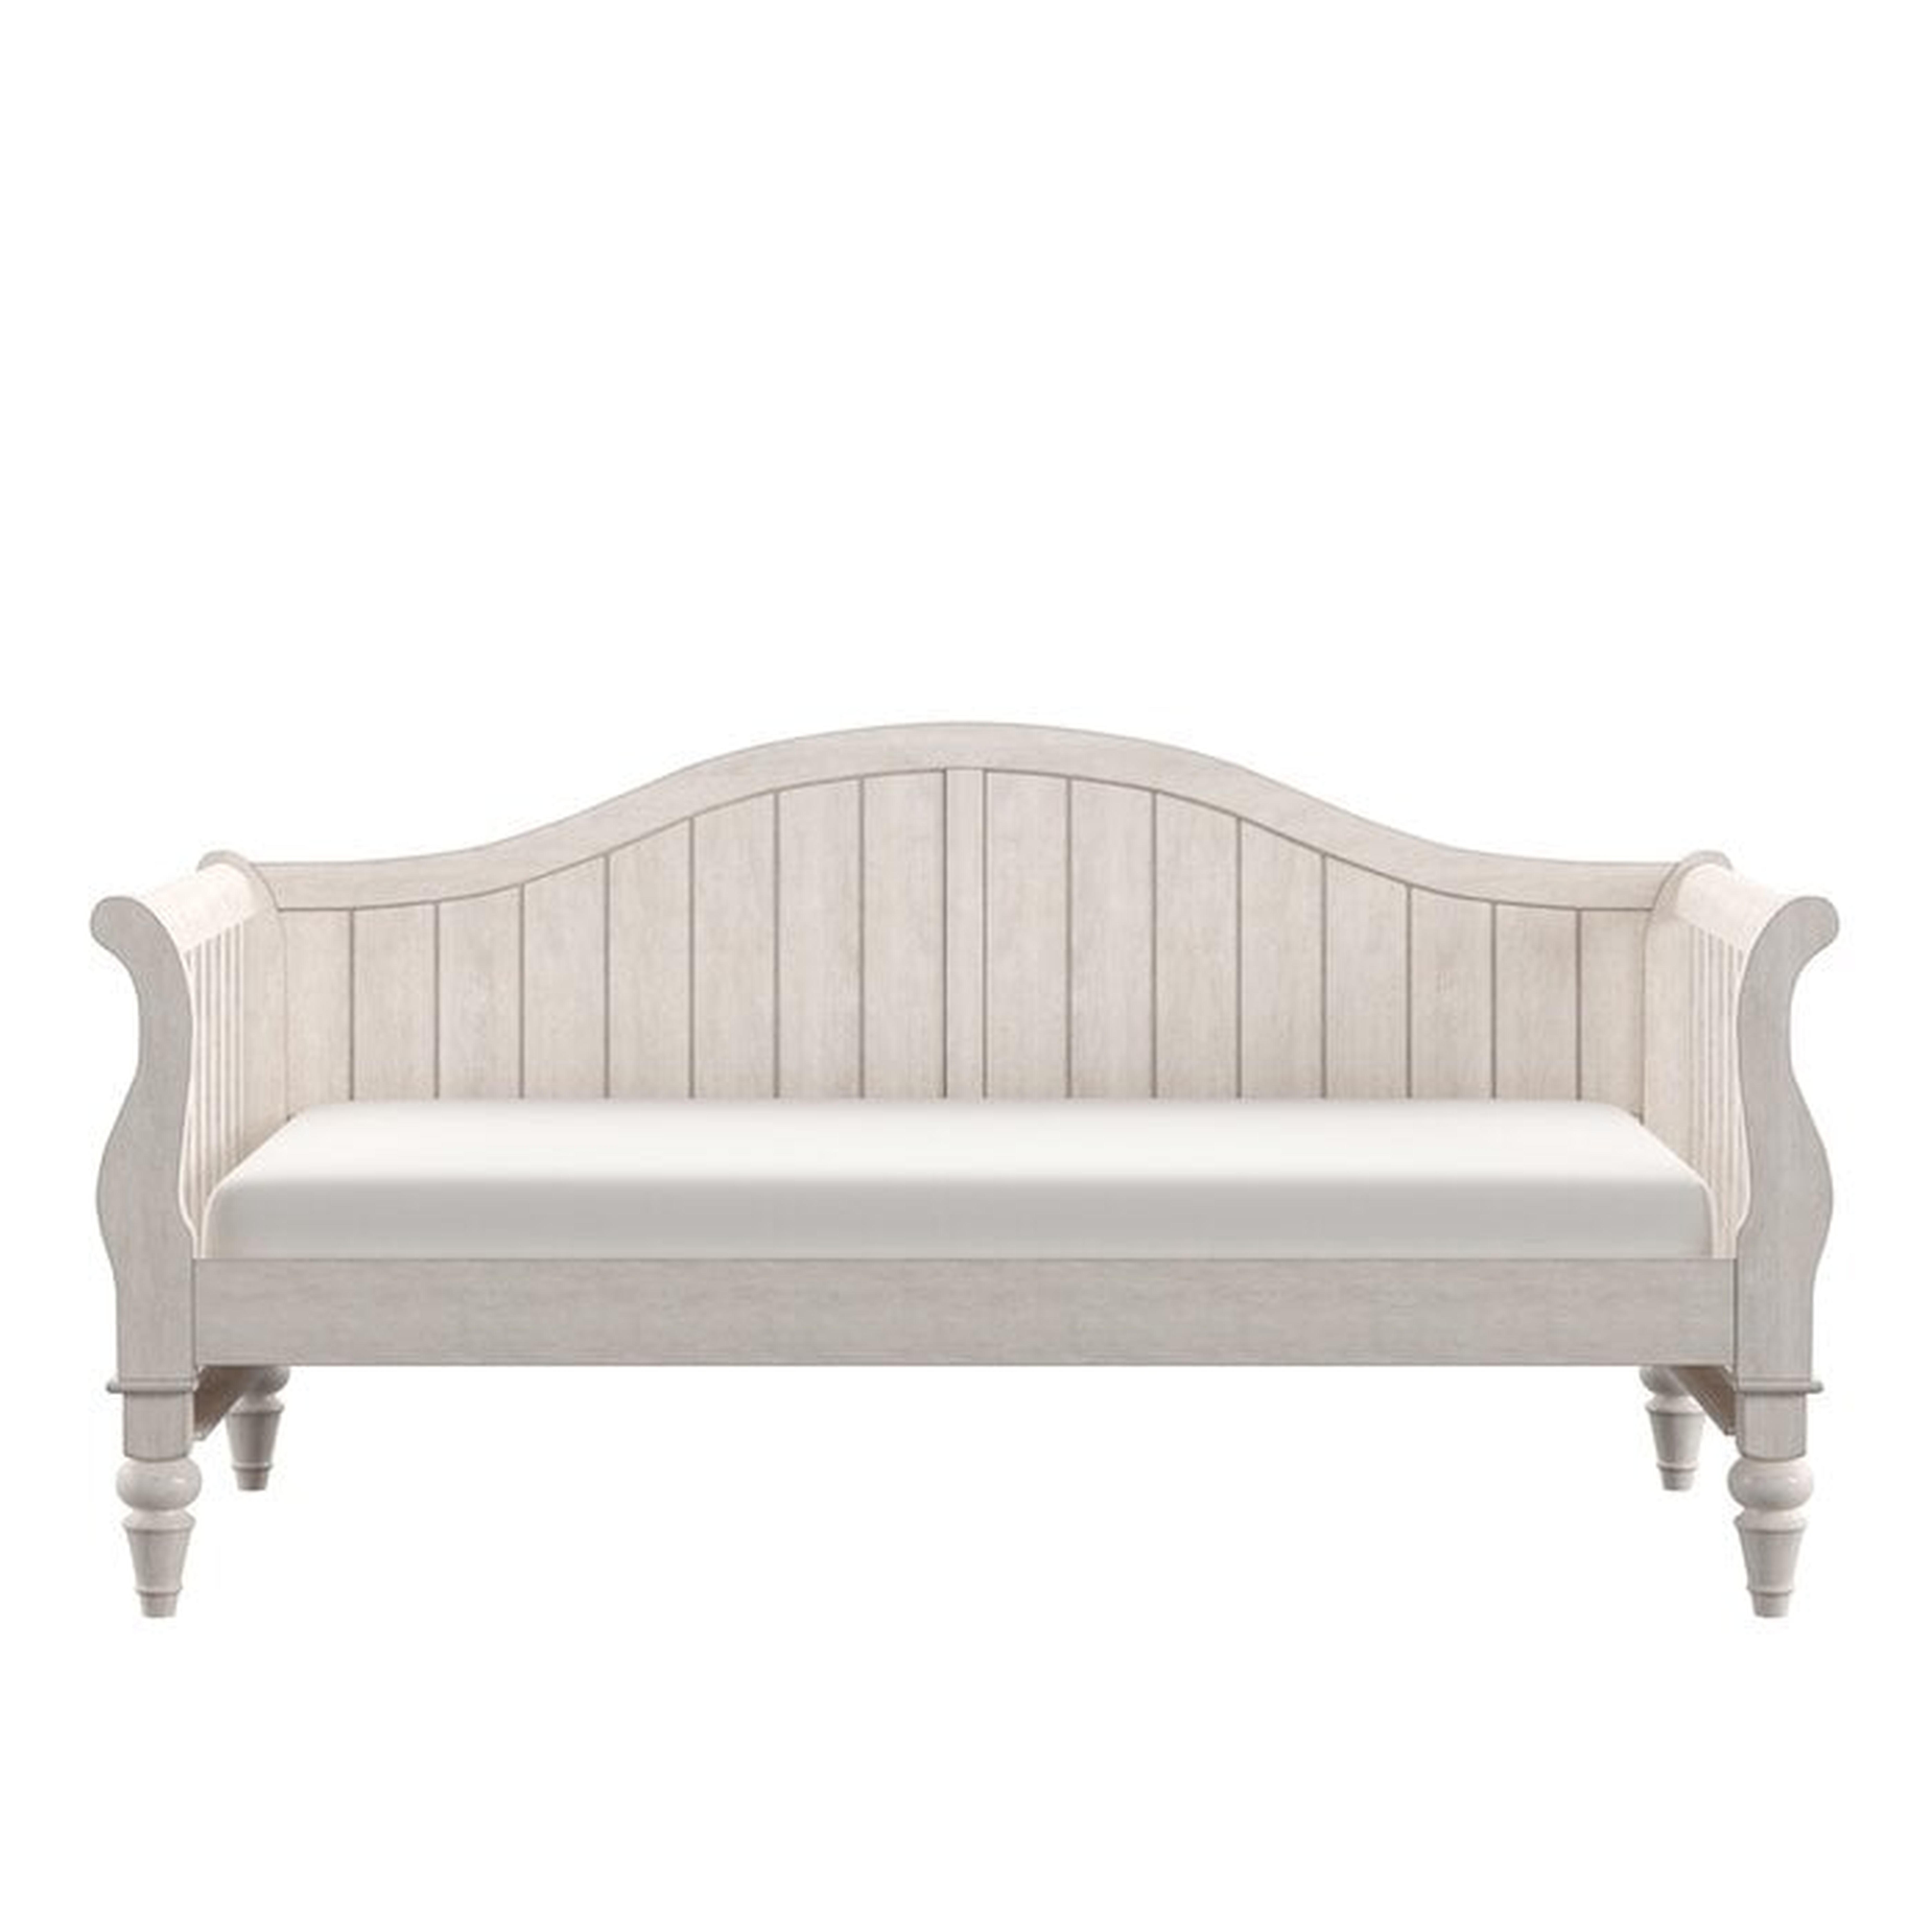 Fort Collins Twin Daybed - Wayfair